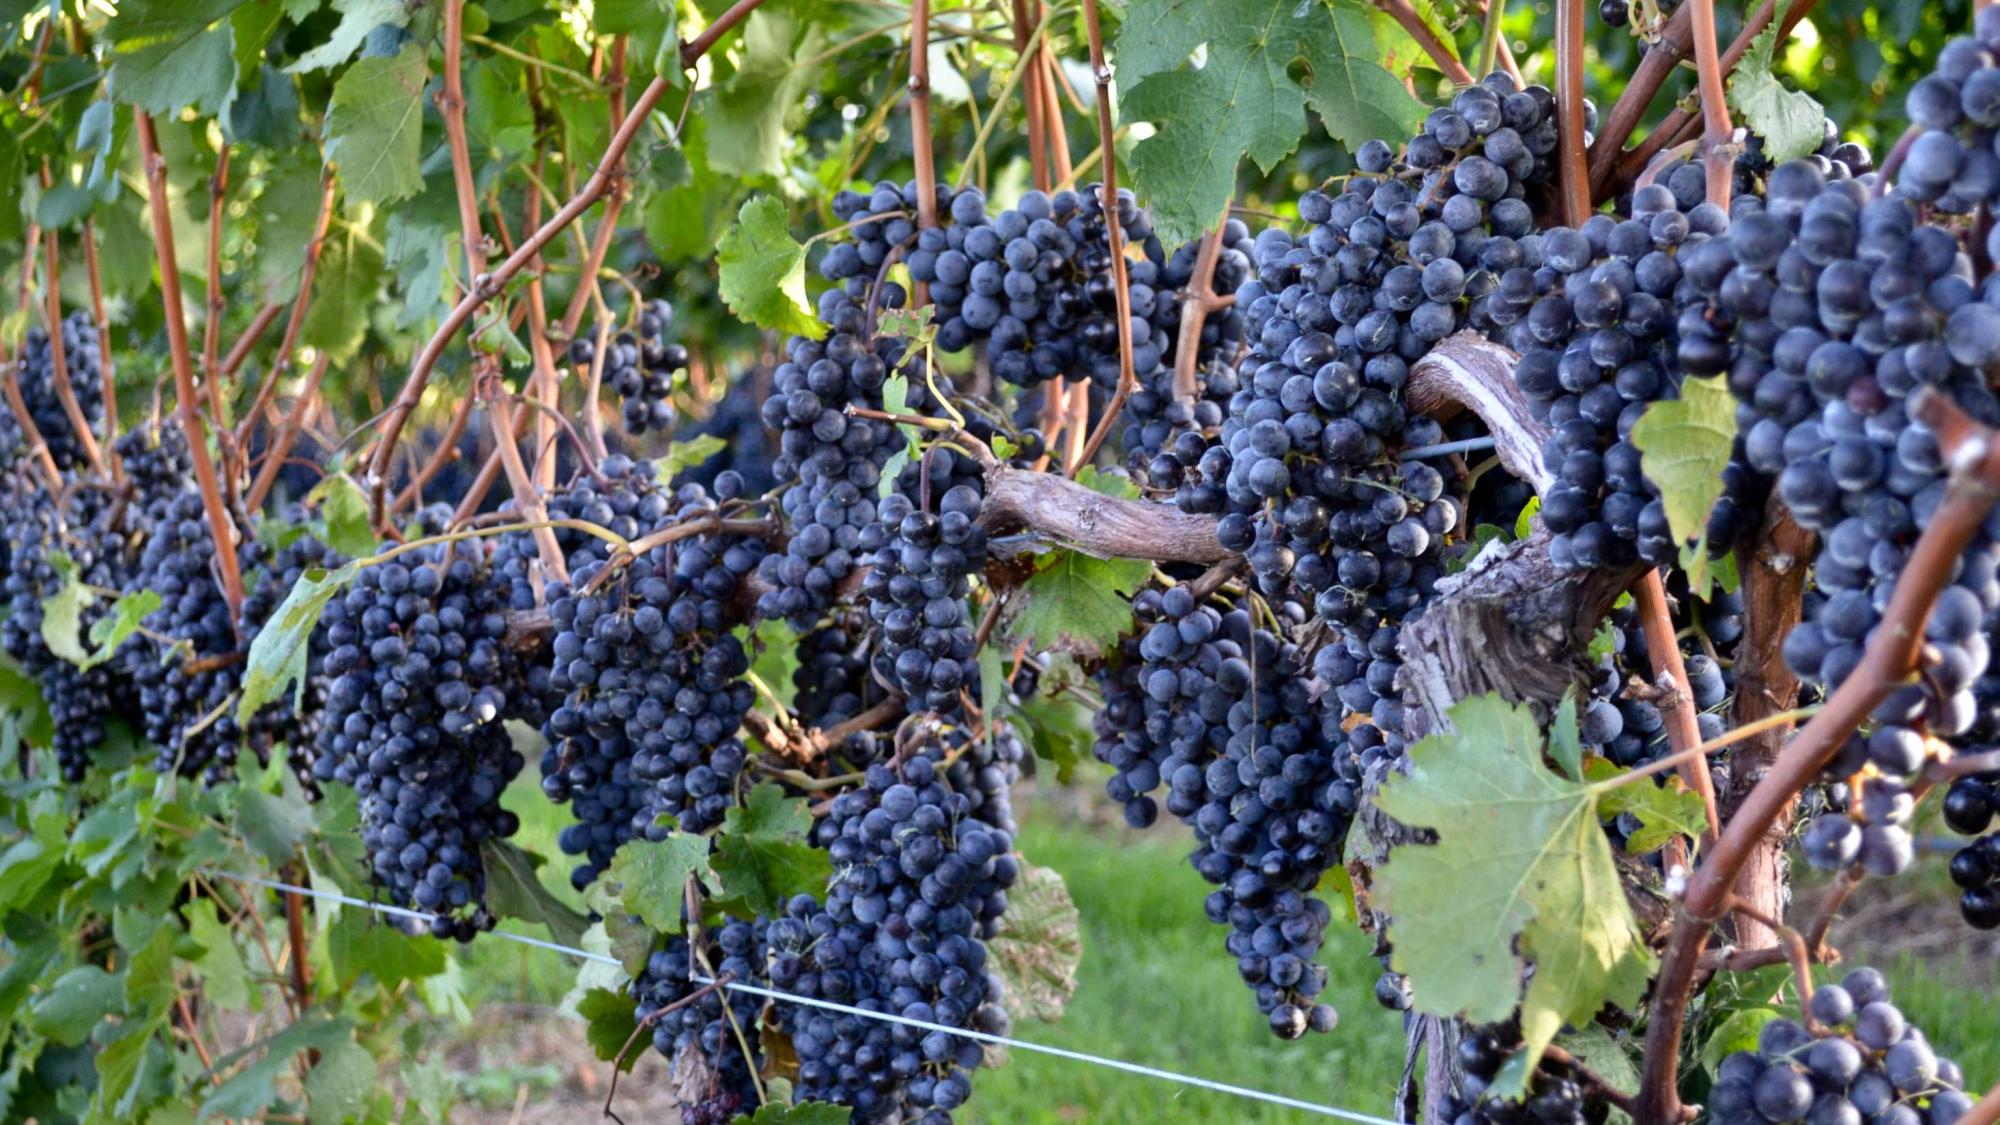 Clusters of ripe, dark grapes hanging from vines in a vineyard with lush green leaves.